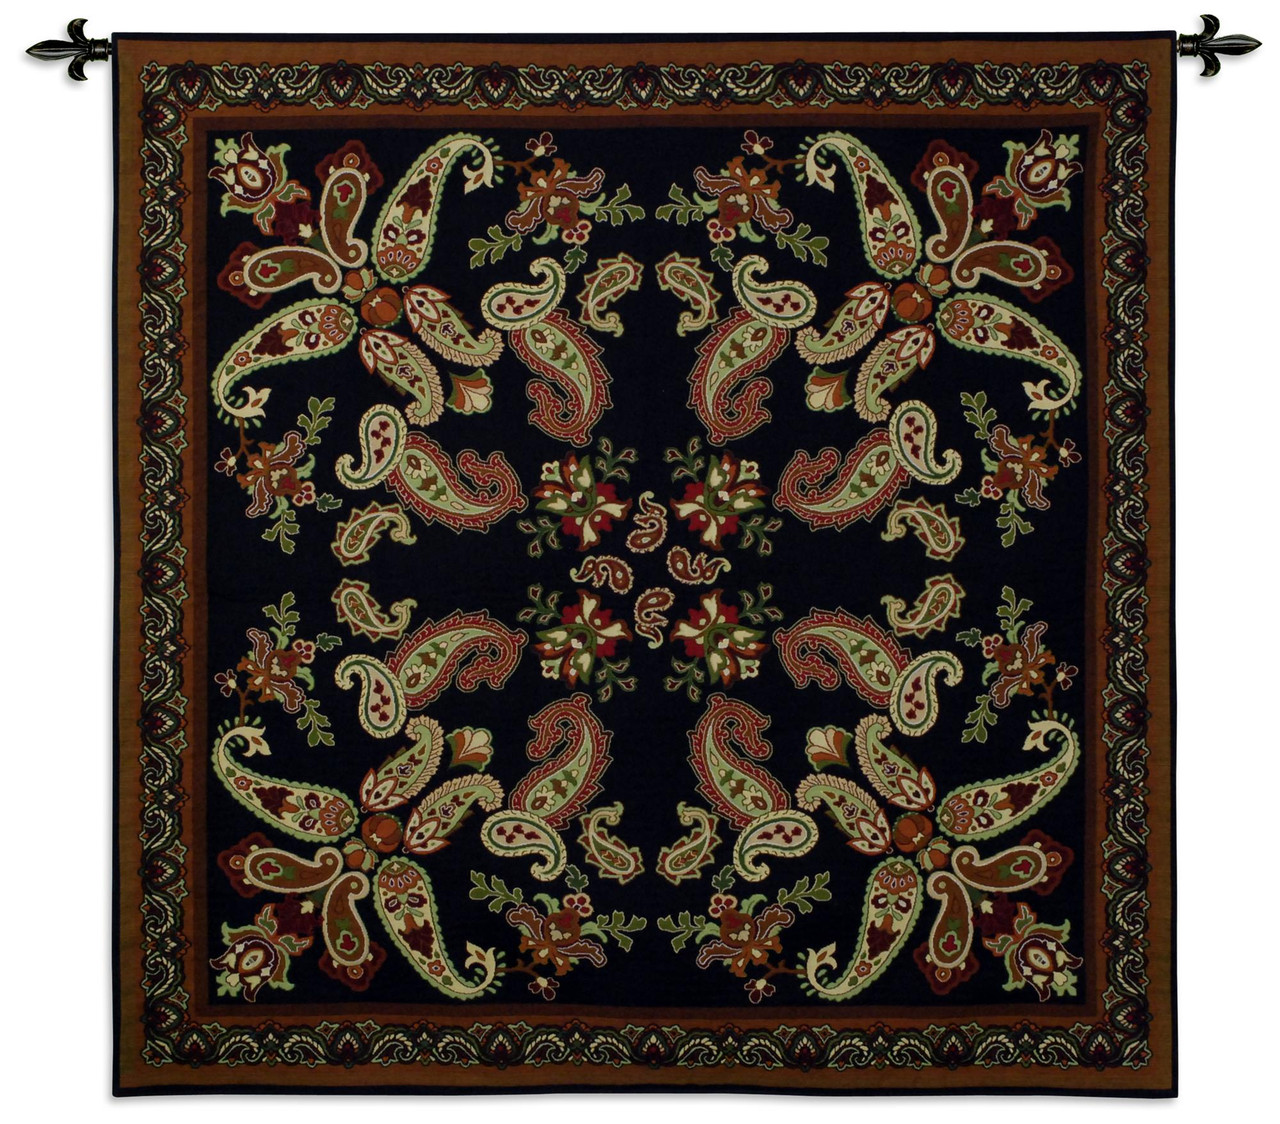 Paisley Dark Woven Tapestry Wall Art Hanging Ornate Floral Persian  Inspired Design 100% Cotton USA Size 53x52